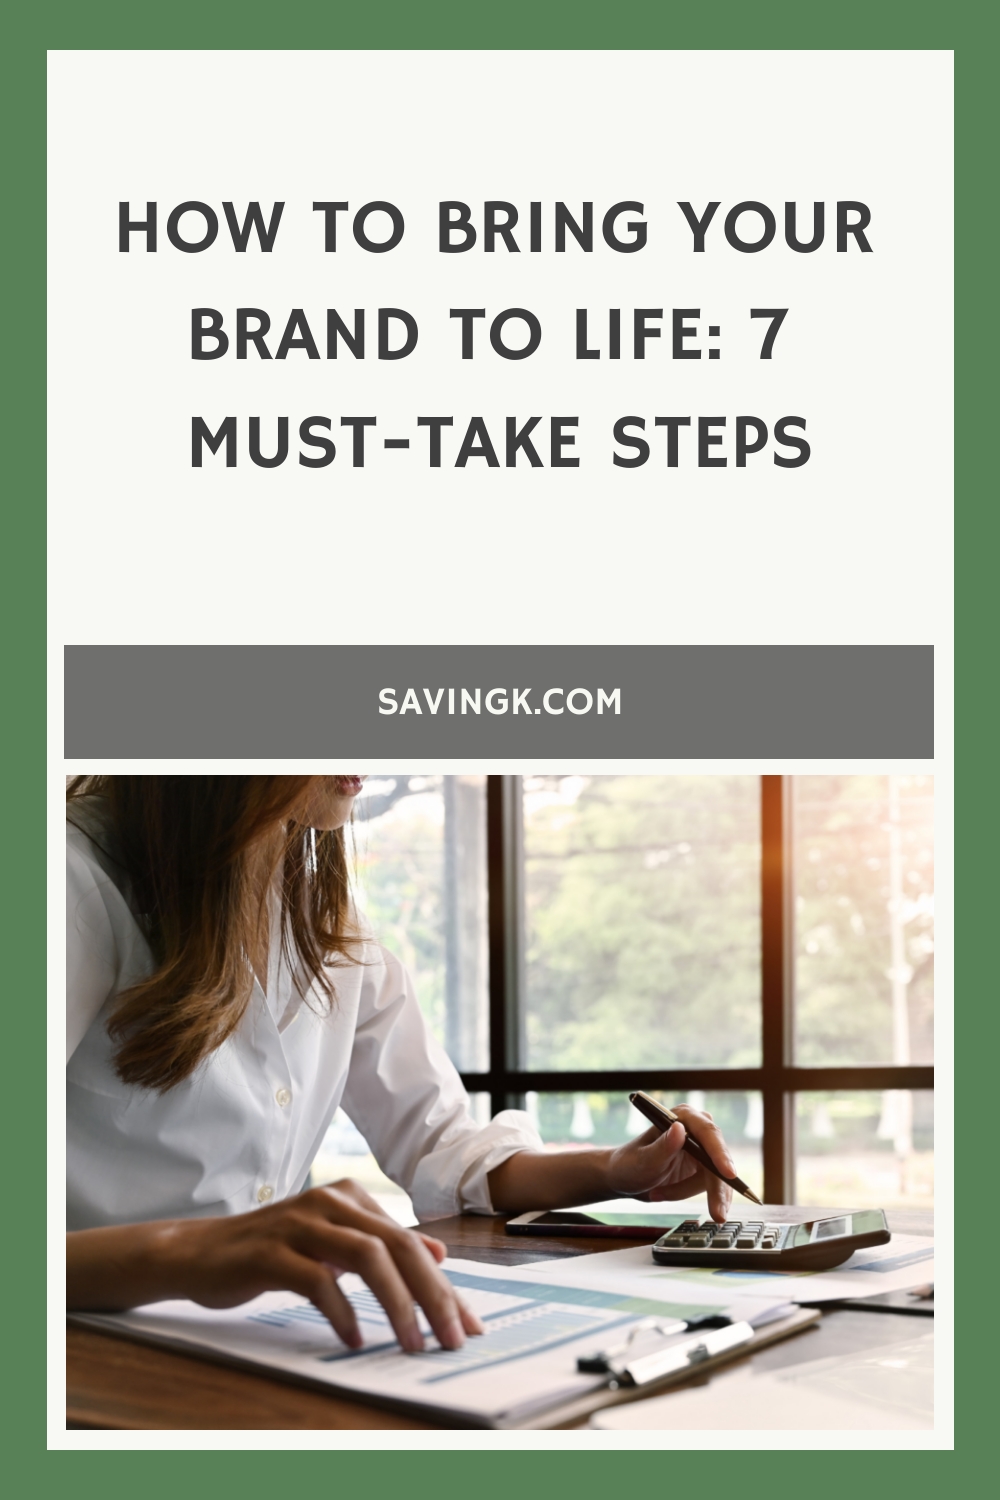 How To Bring Your Brand to Life: 7 Must-Take Steps